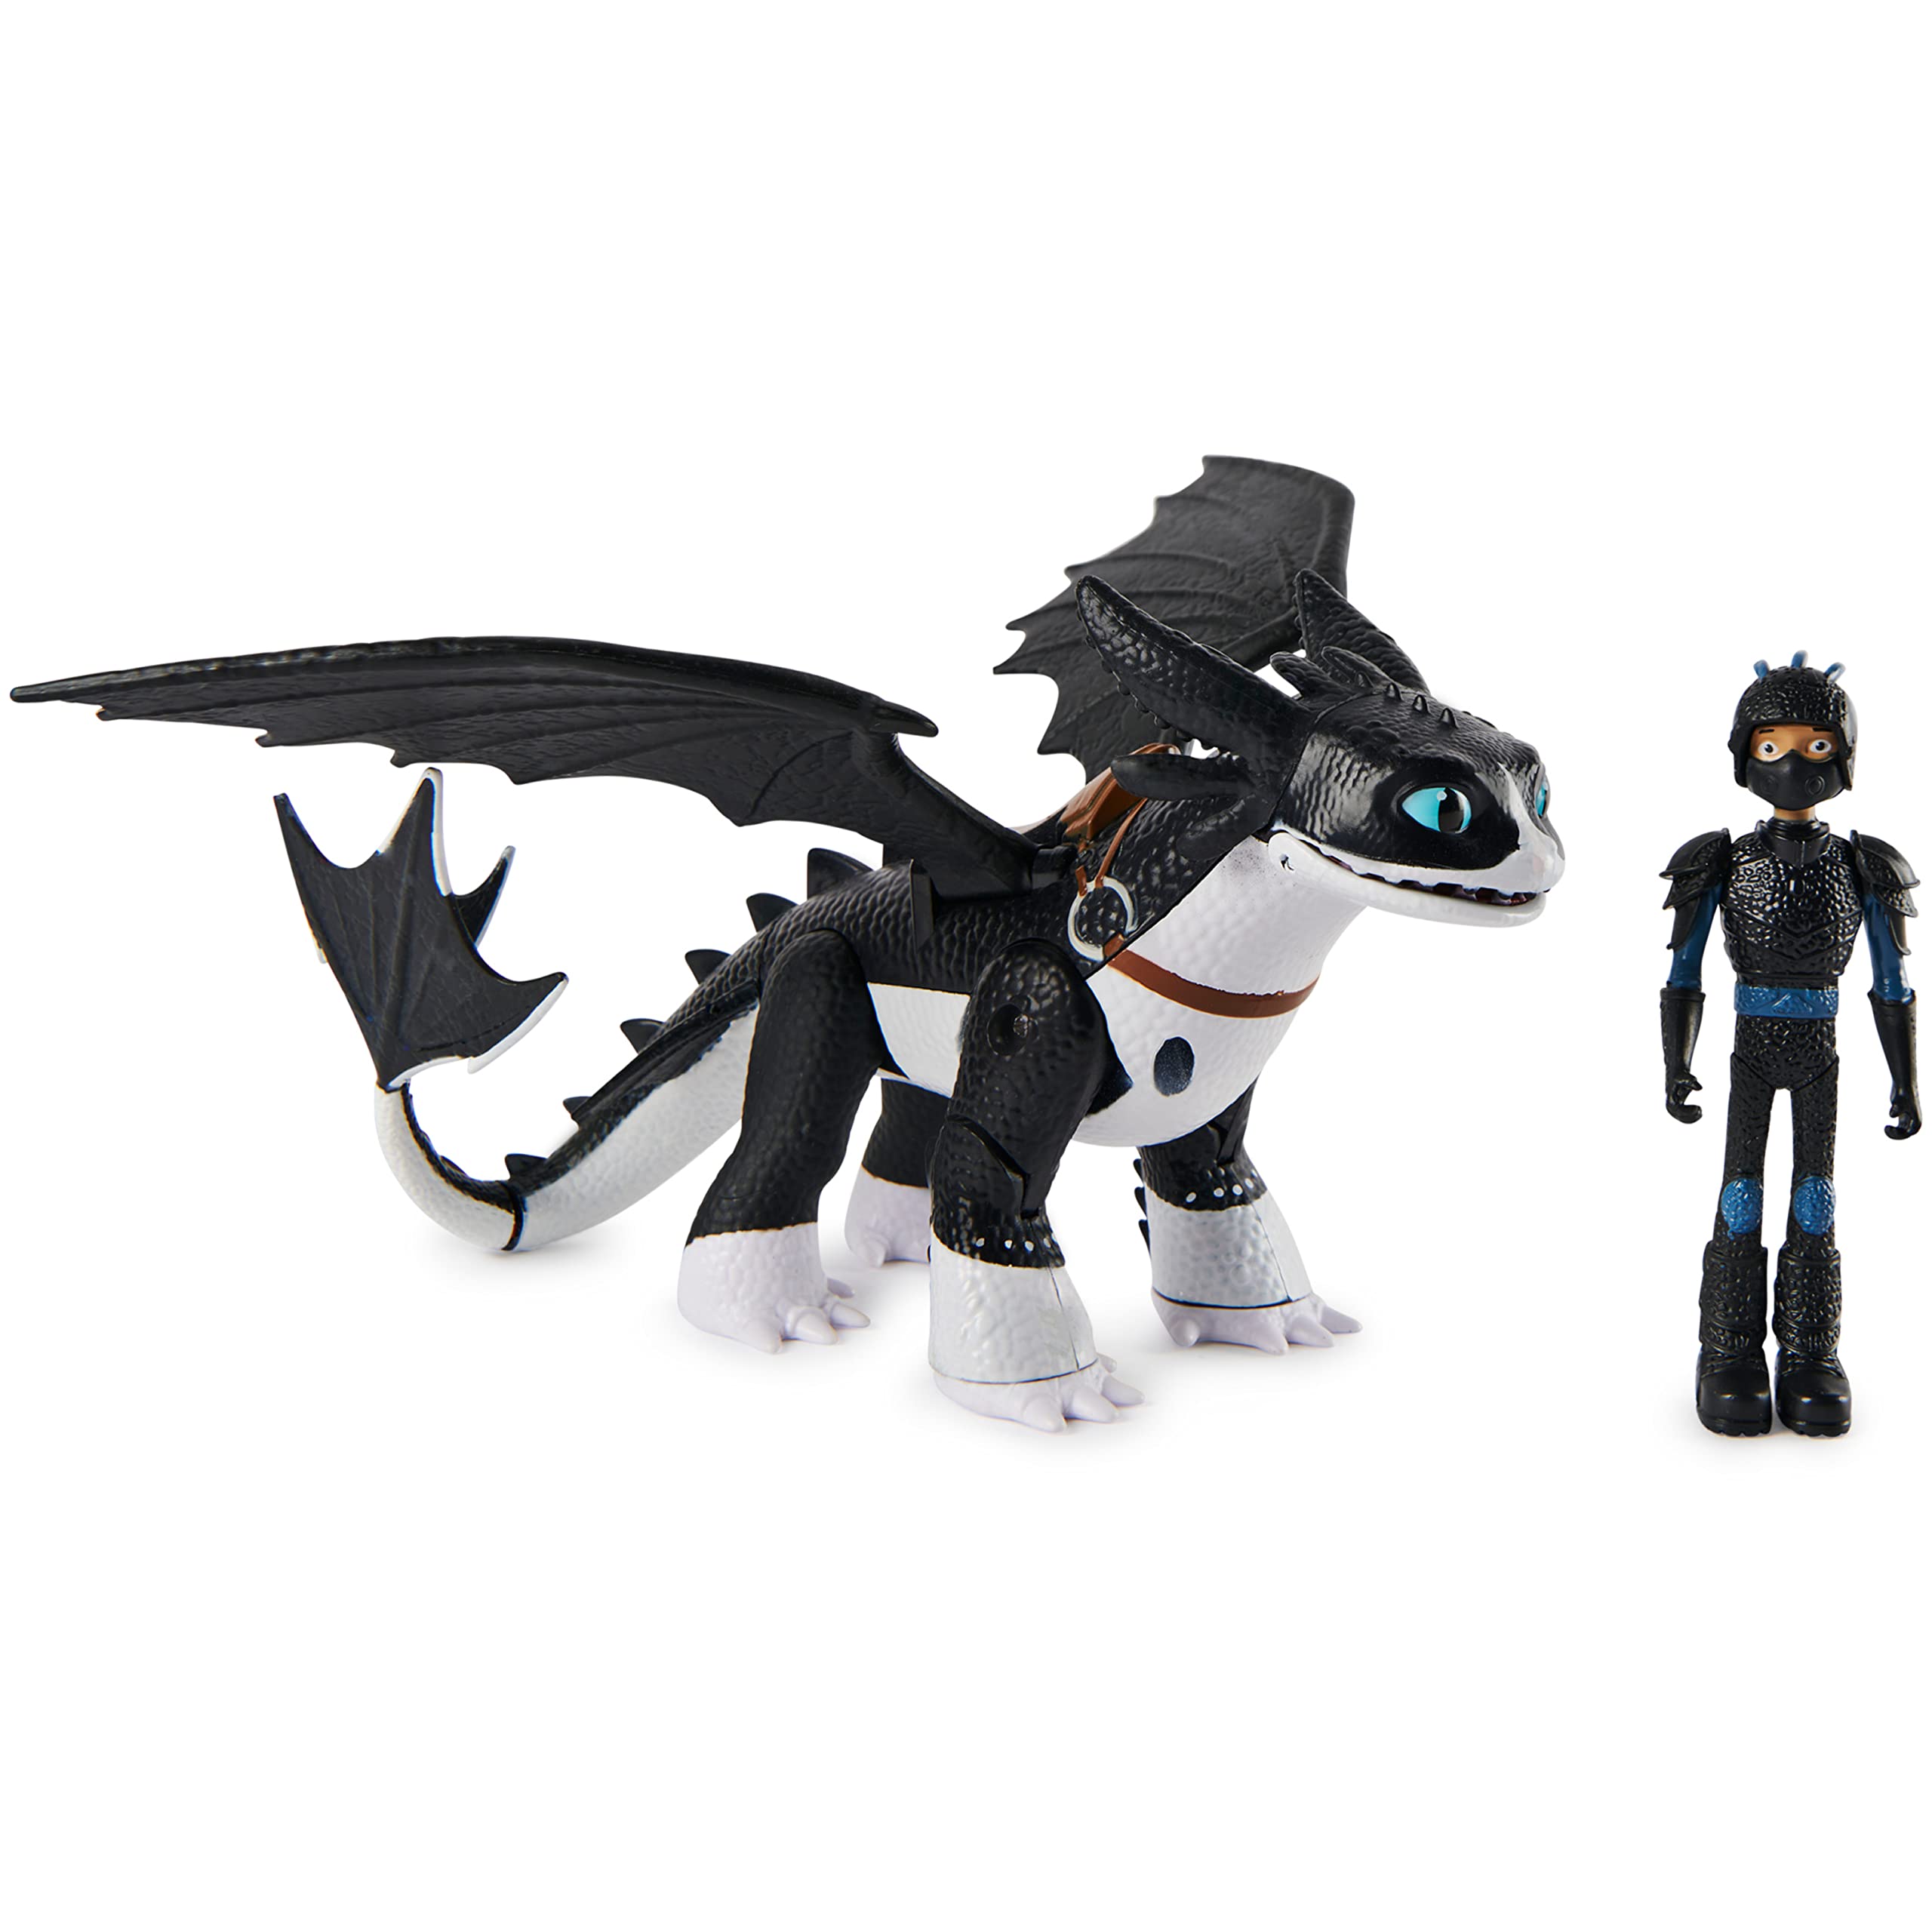 Dreamworks Dragons Adventure Set, Tom and Thunder Figures, The Nine Realms, Kids Toys for Age 4 and Up